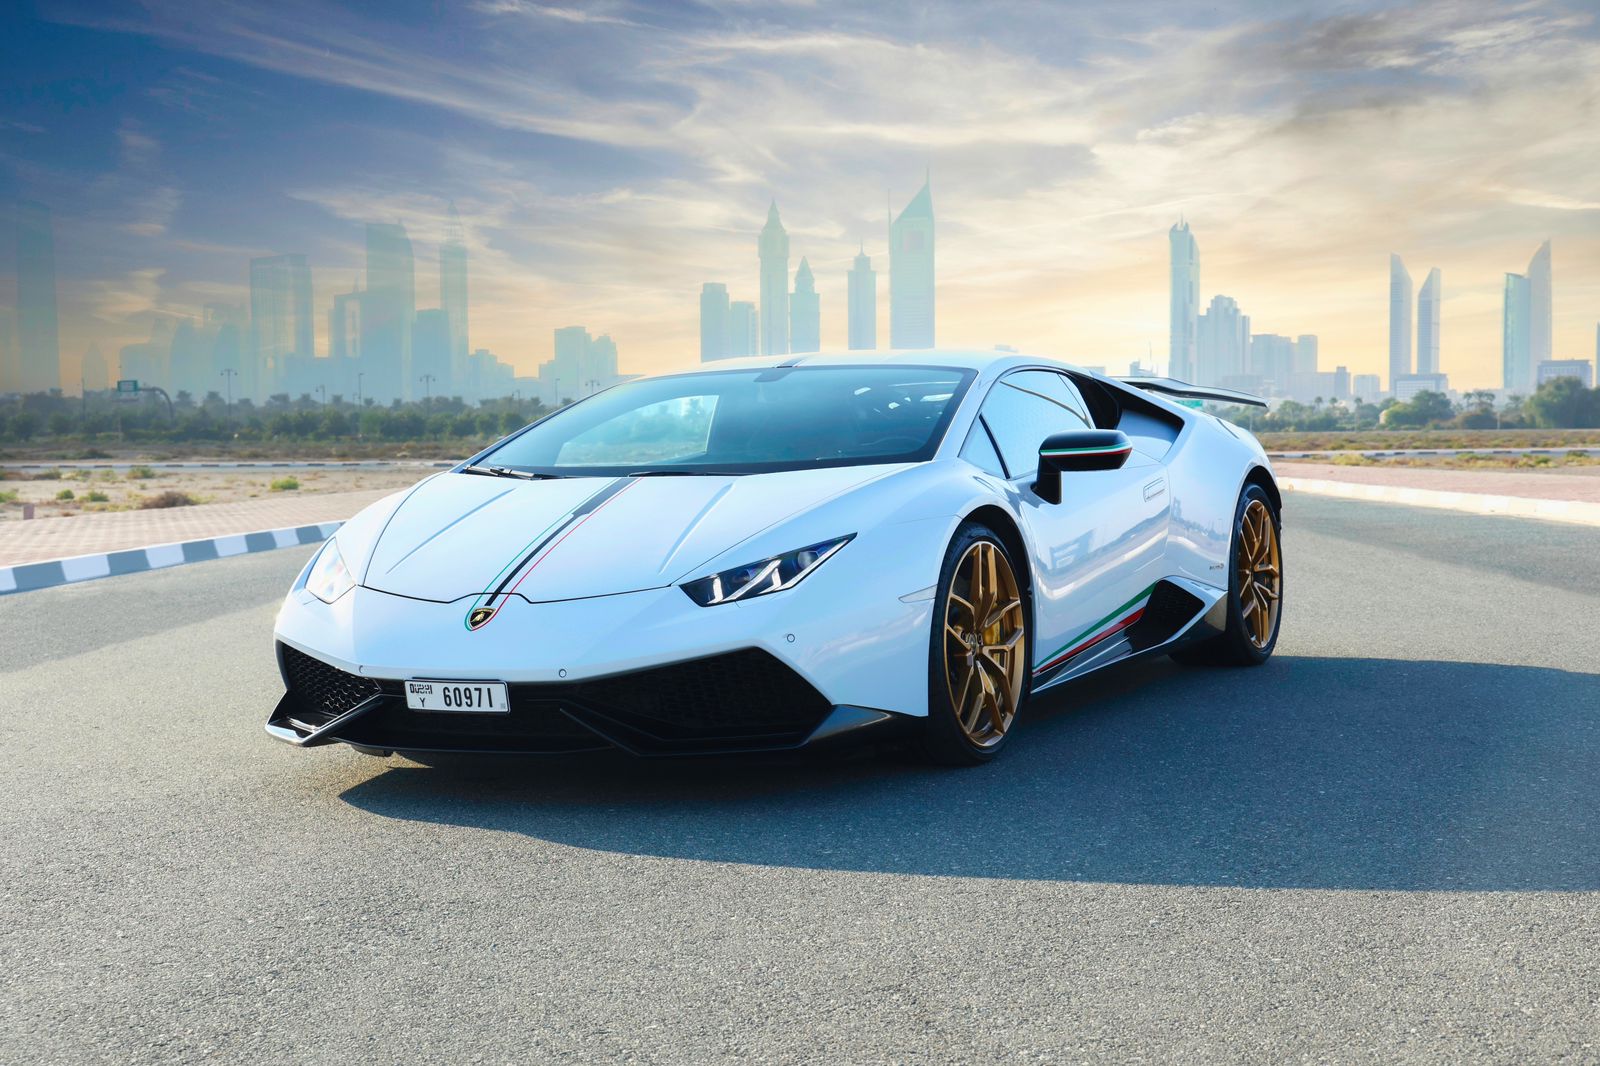 Selling your Luxury Car in Dubai Made Easy: A Comprehensive Guide